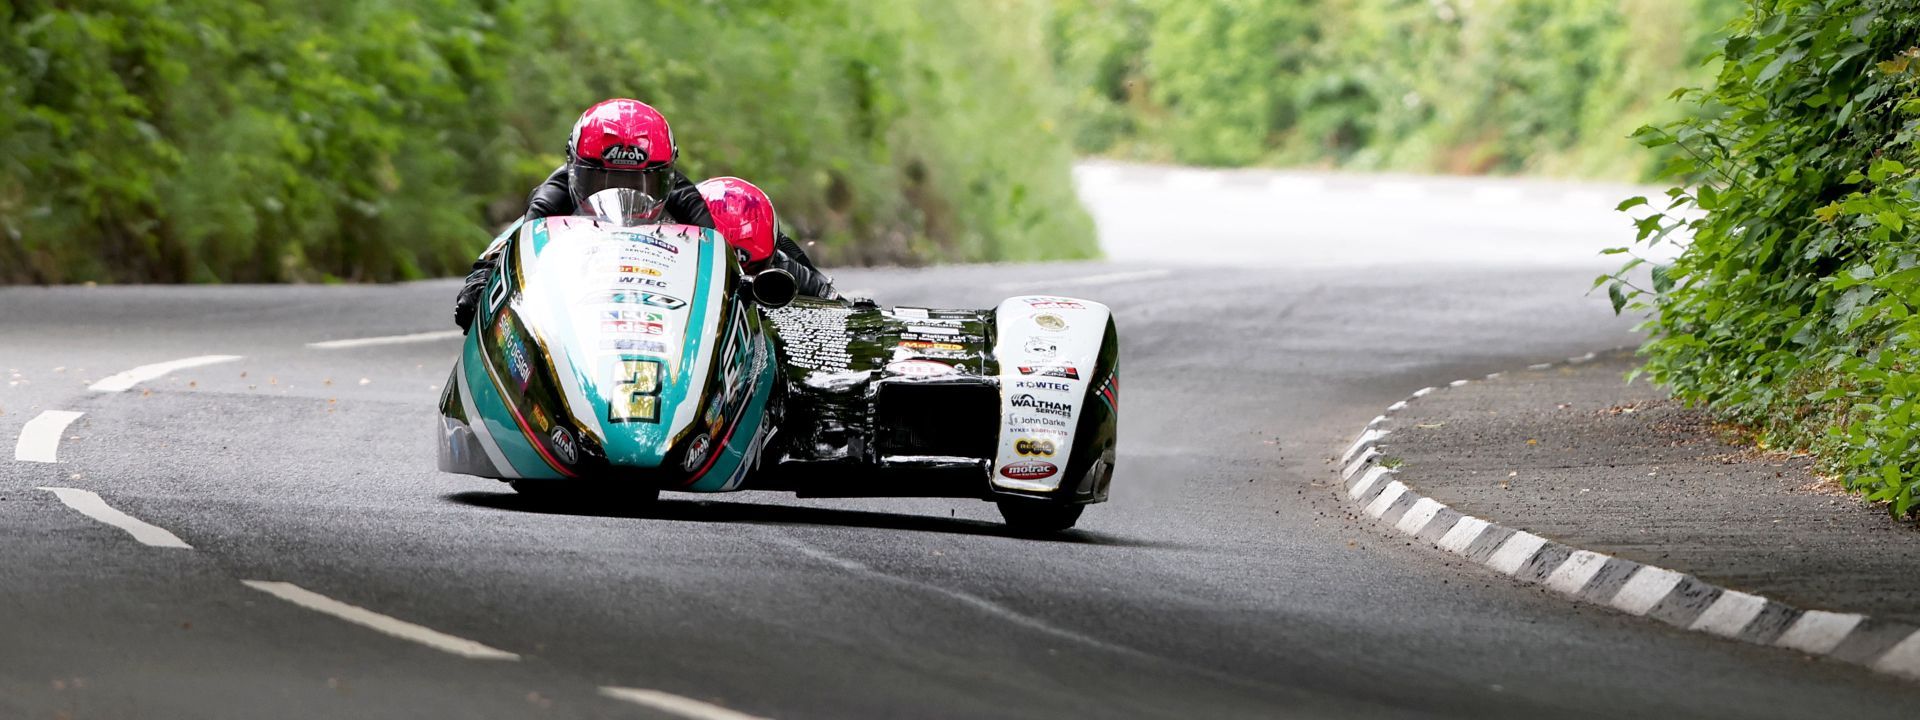 Pete Founds and Jevan Walmsley FHO sidecar racing at the IoM TT